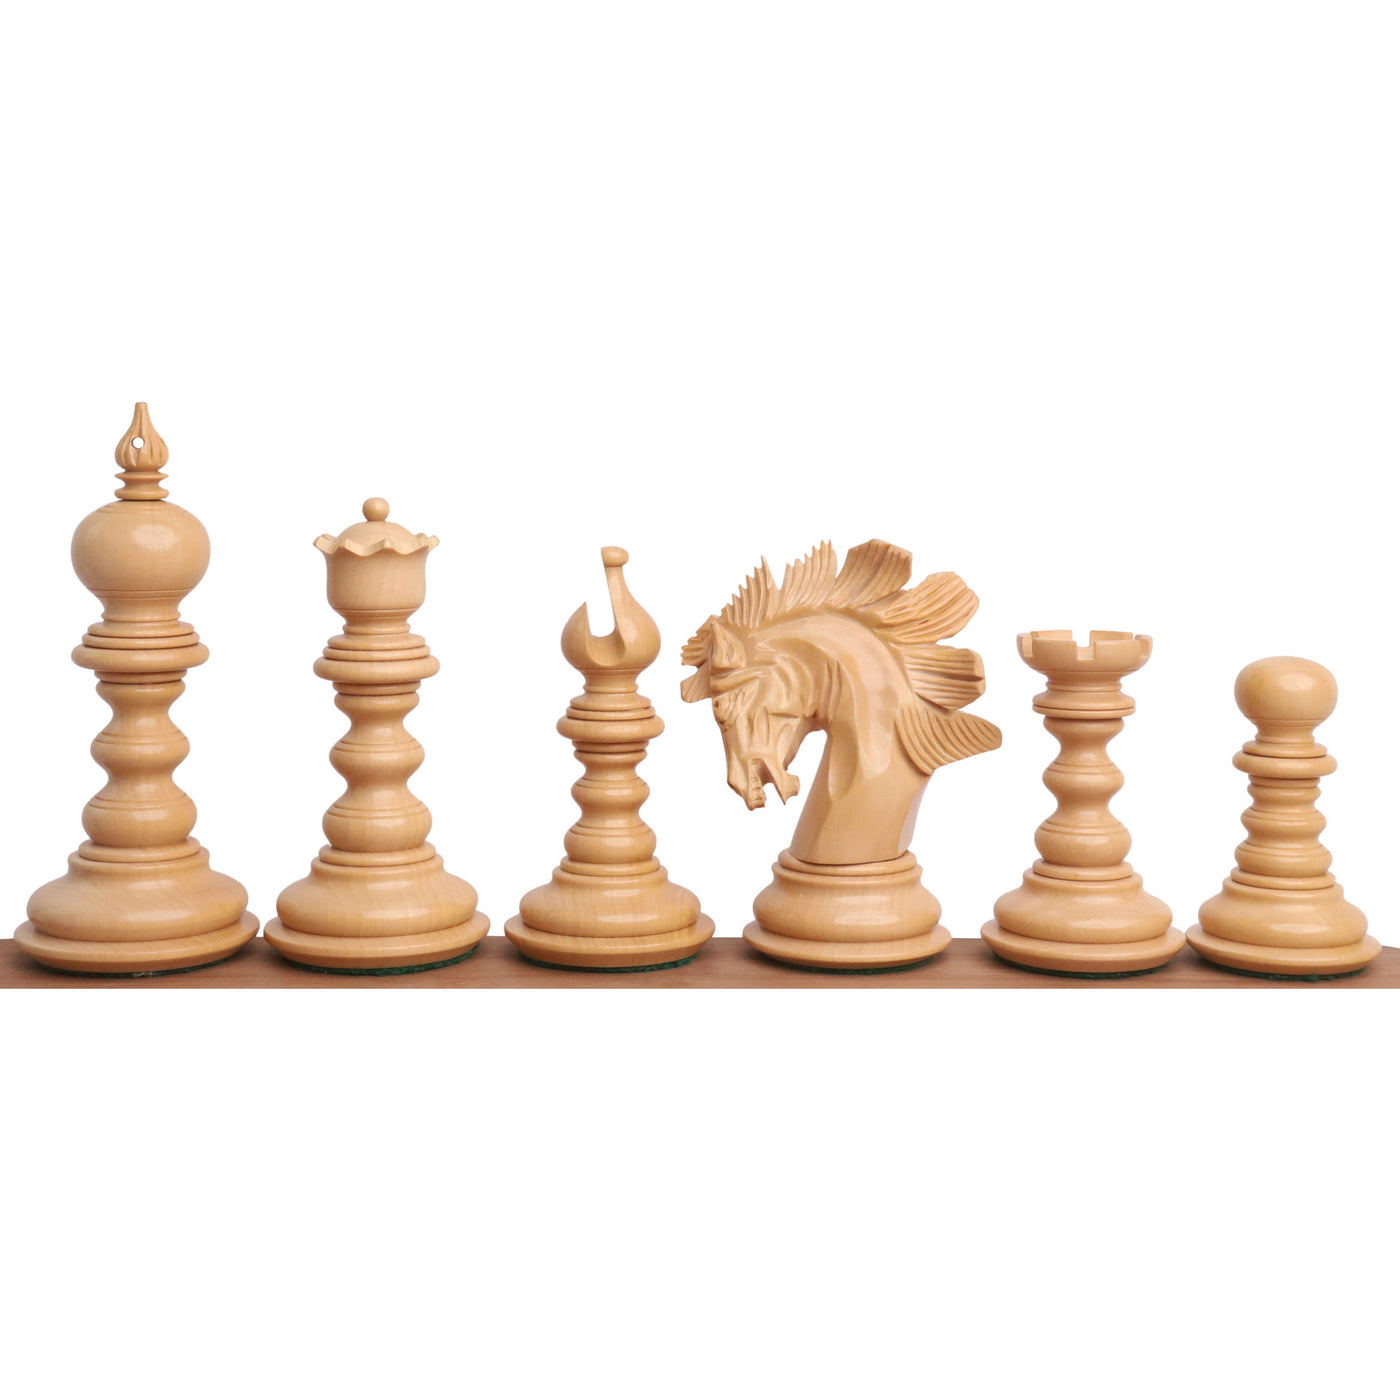 4.3" Marengo Luxury Staunton Chess Set - Chess Pieces Only- Bud Rosewood Triple Weight